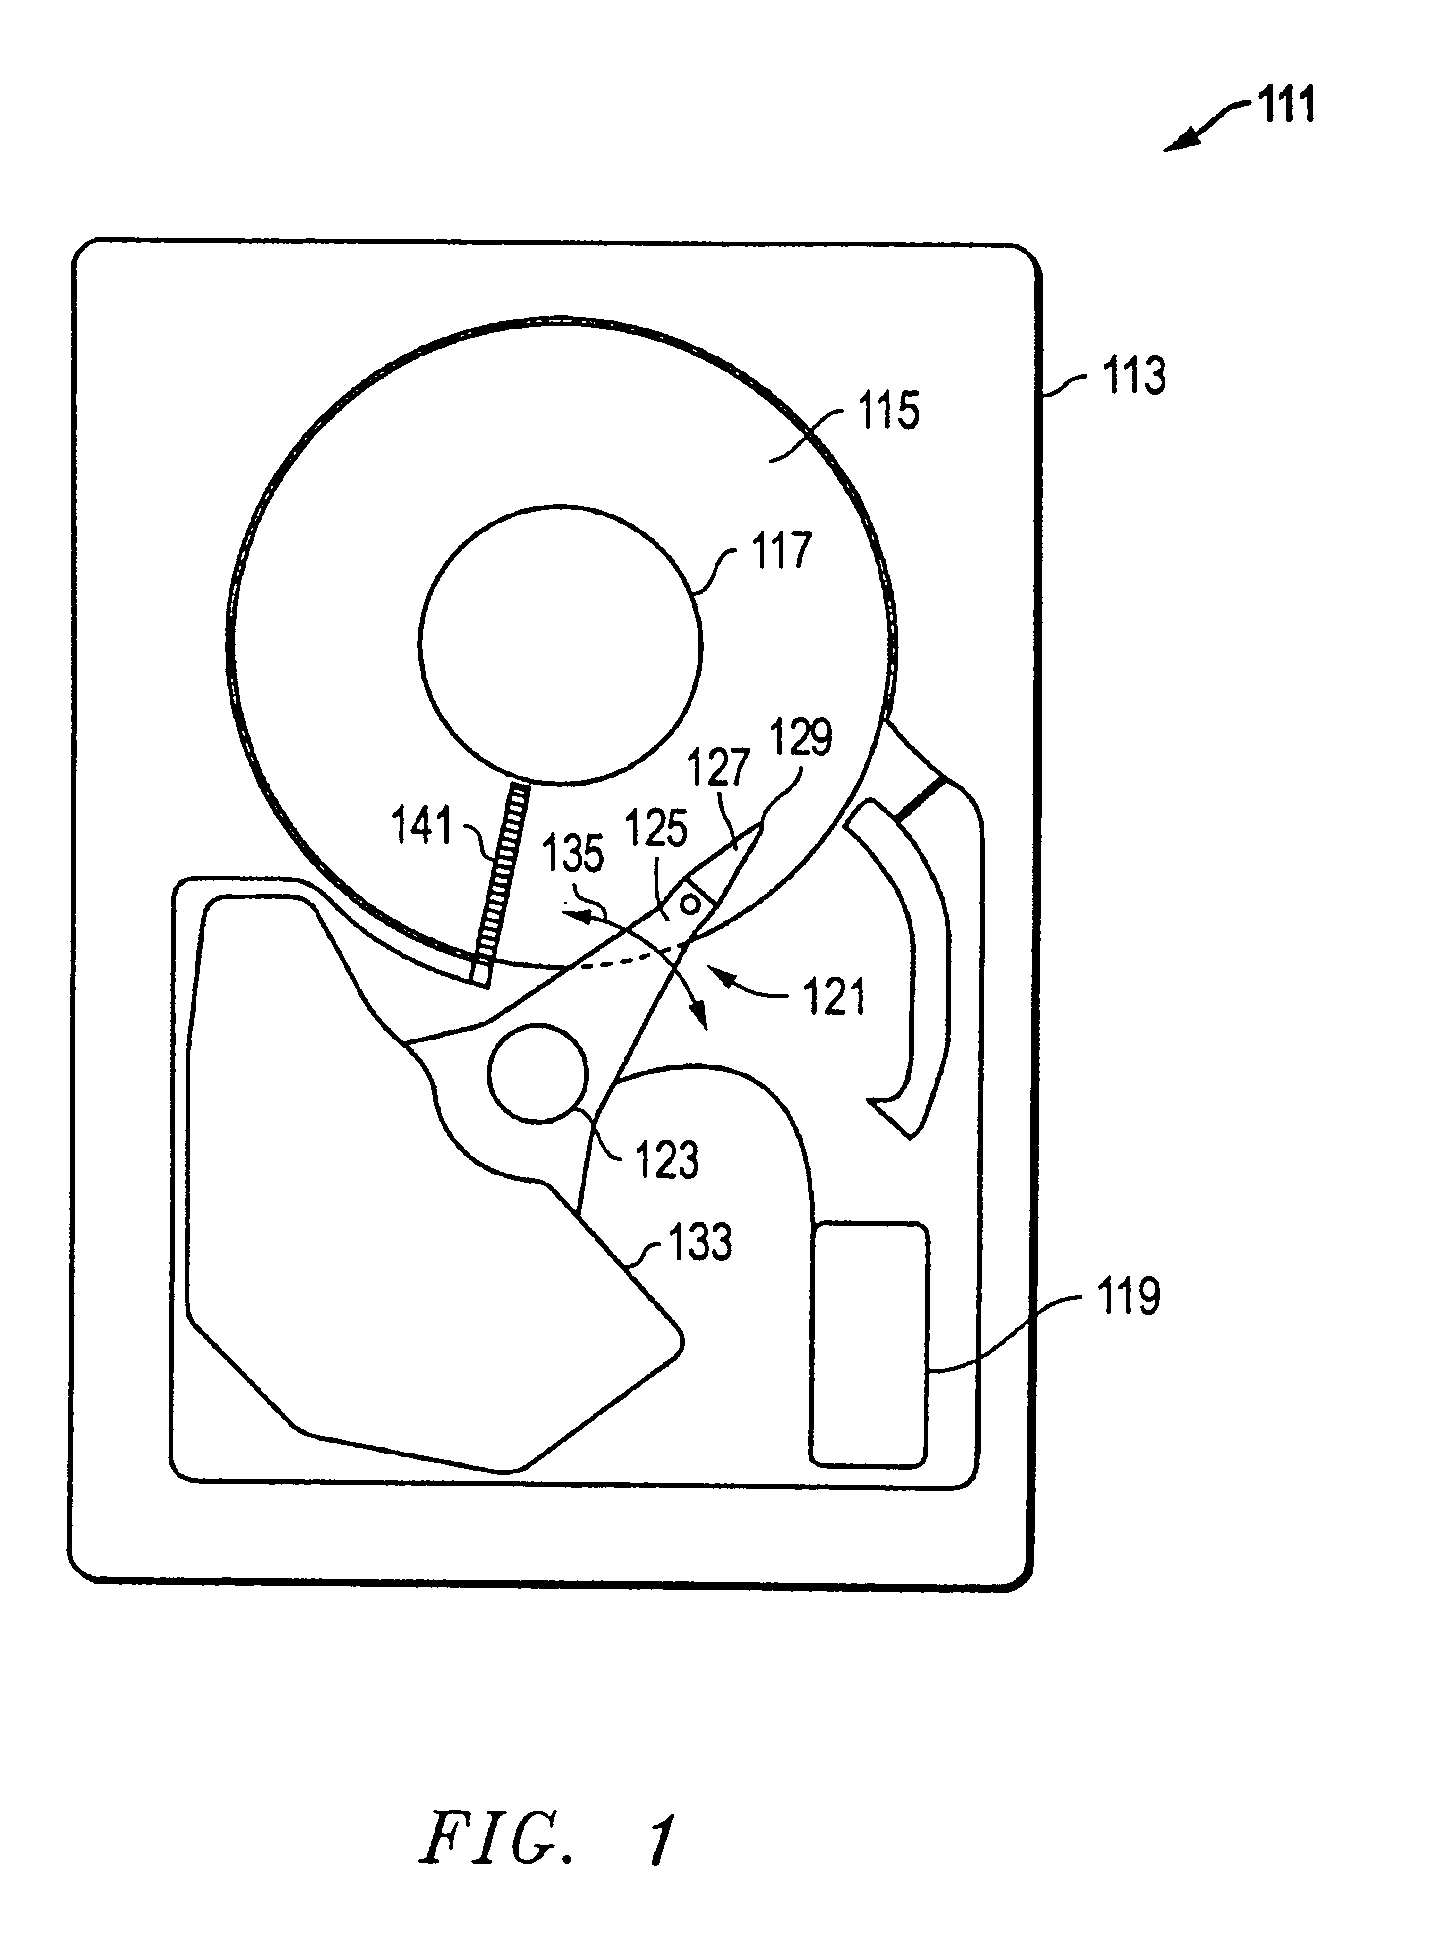 System, method, and apparatus for applying boundary layer manipulation techniques to the air flow inside rotary disk storage devices